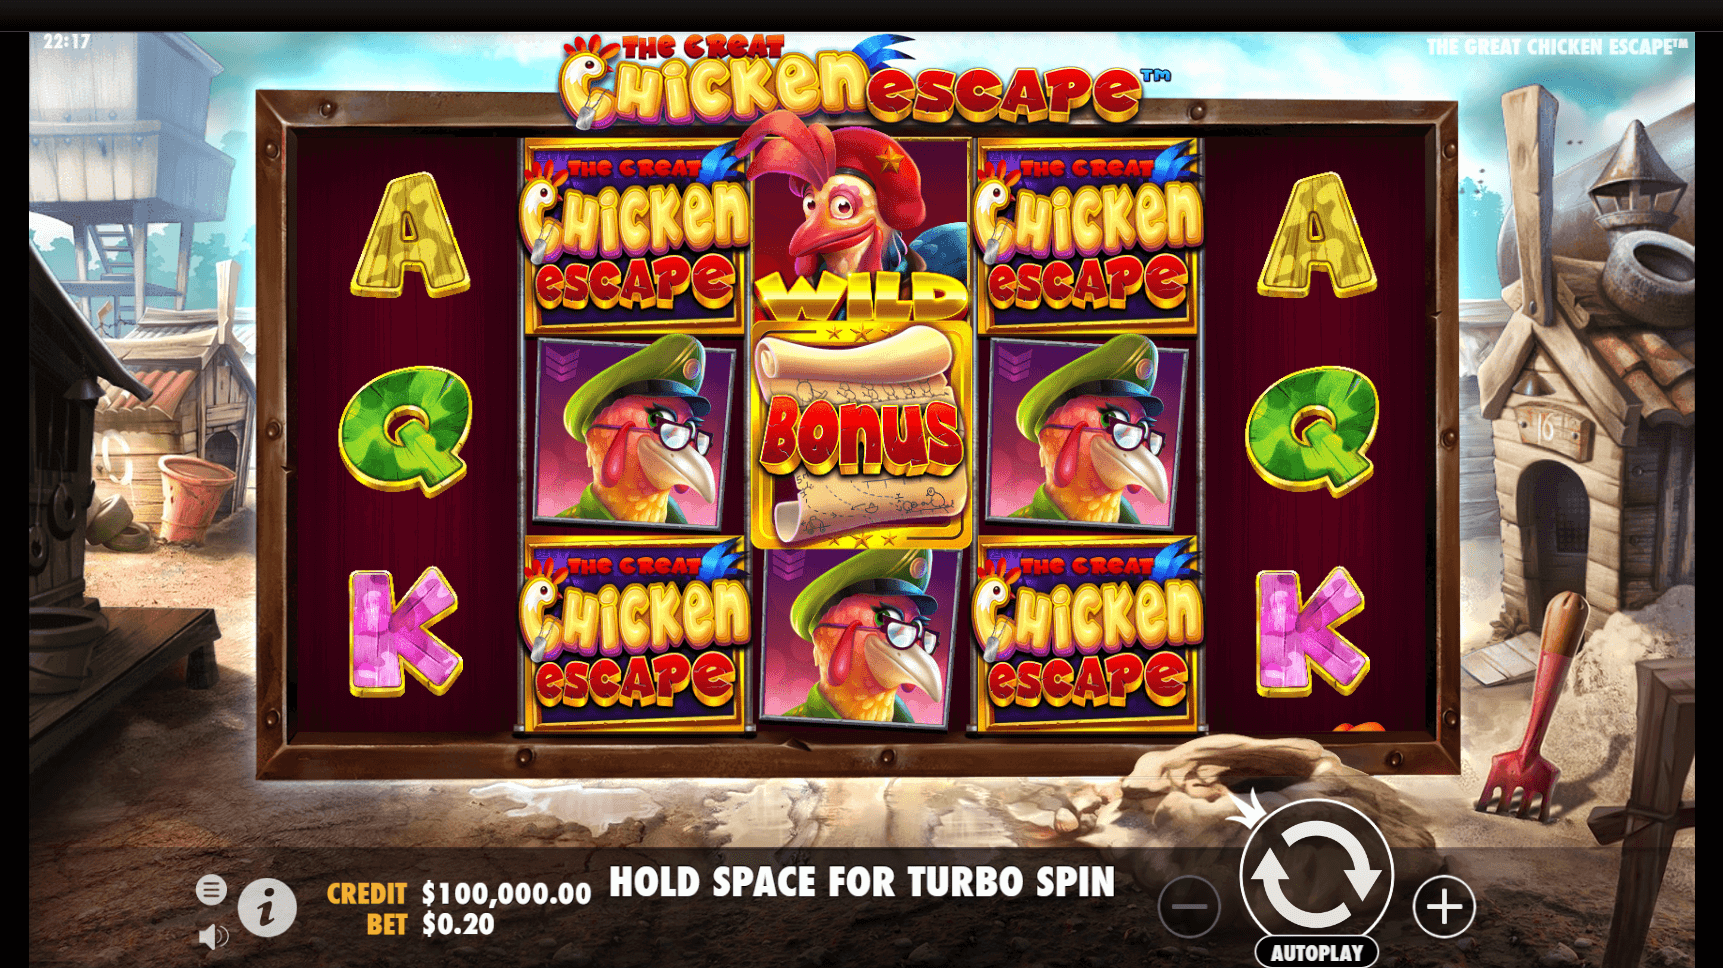 The Great Chicken Escape slot play free